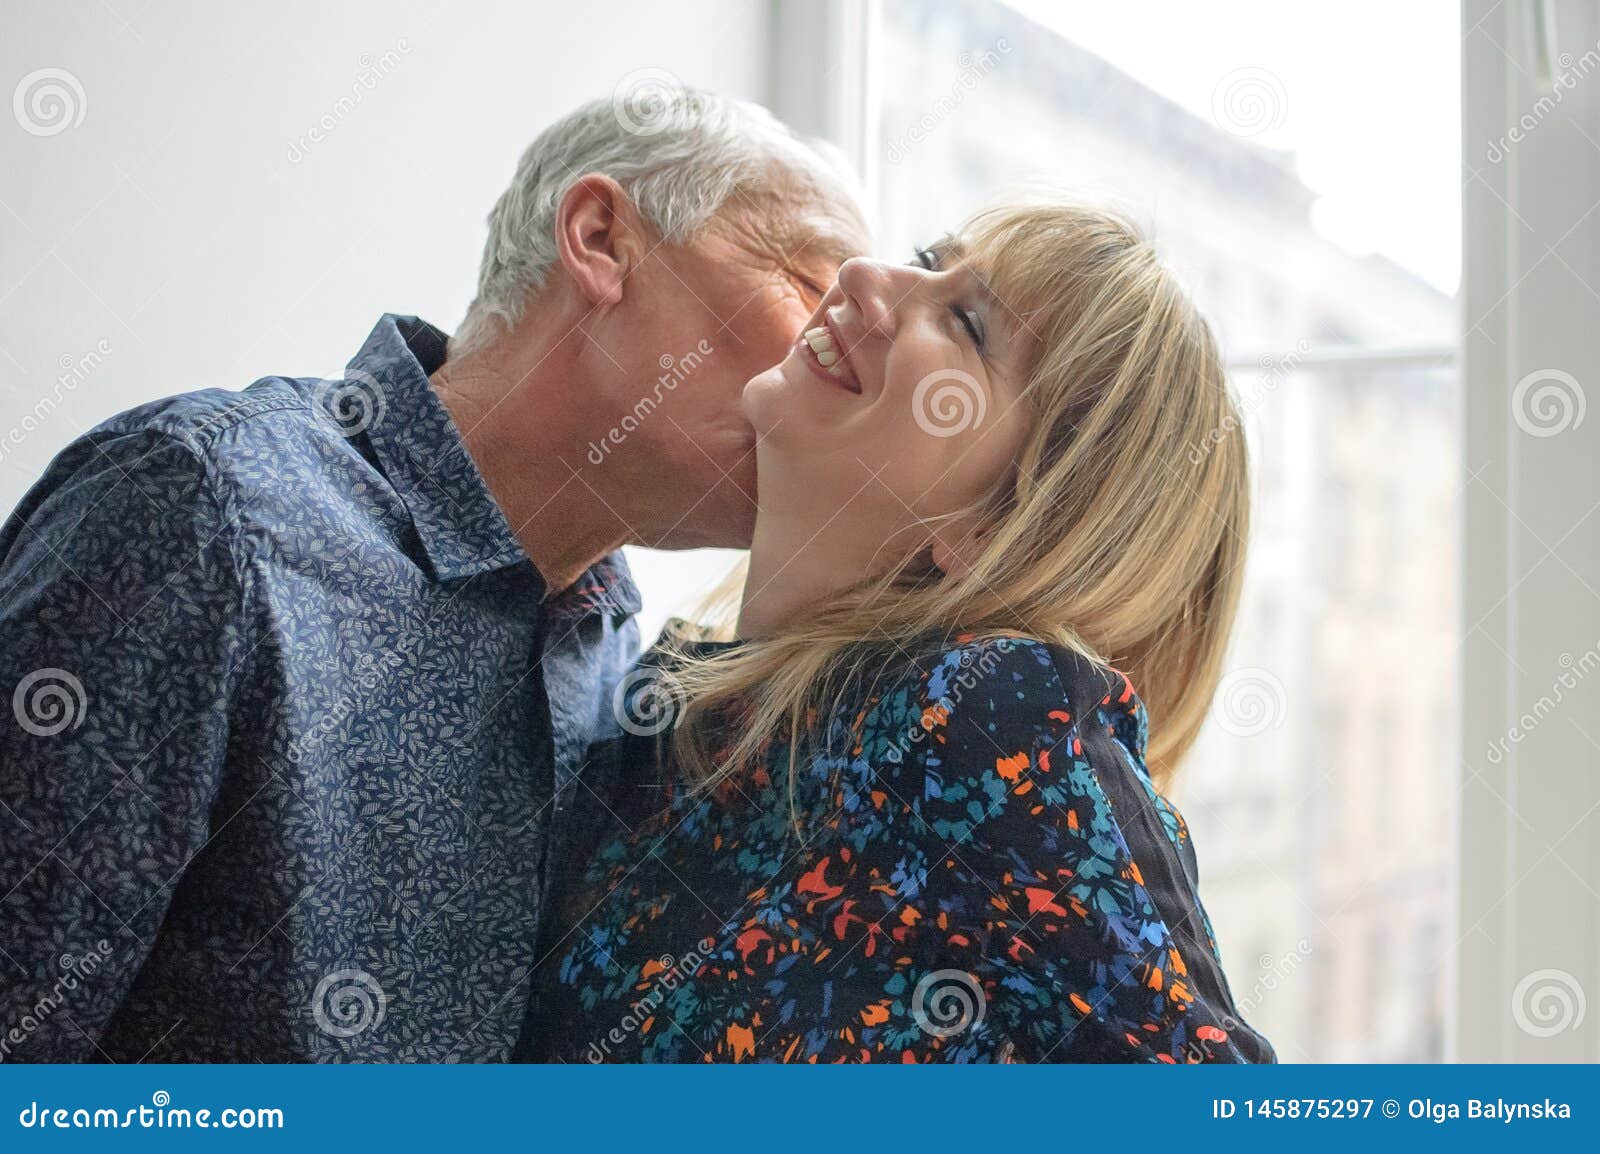 Hot and Middle-aged Woman Enjoying Hug of Her Elderly Husband Standing Near Opened Window Inside Their Home